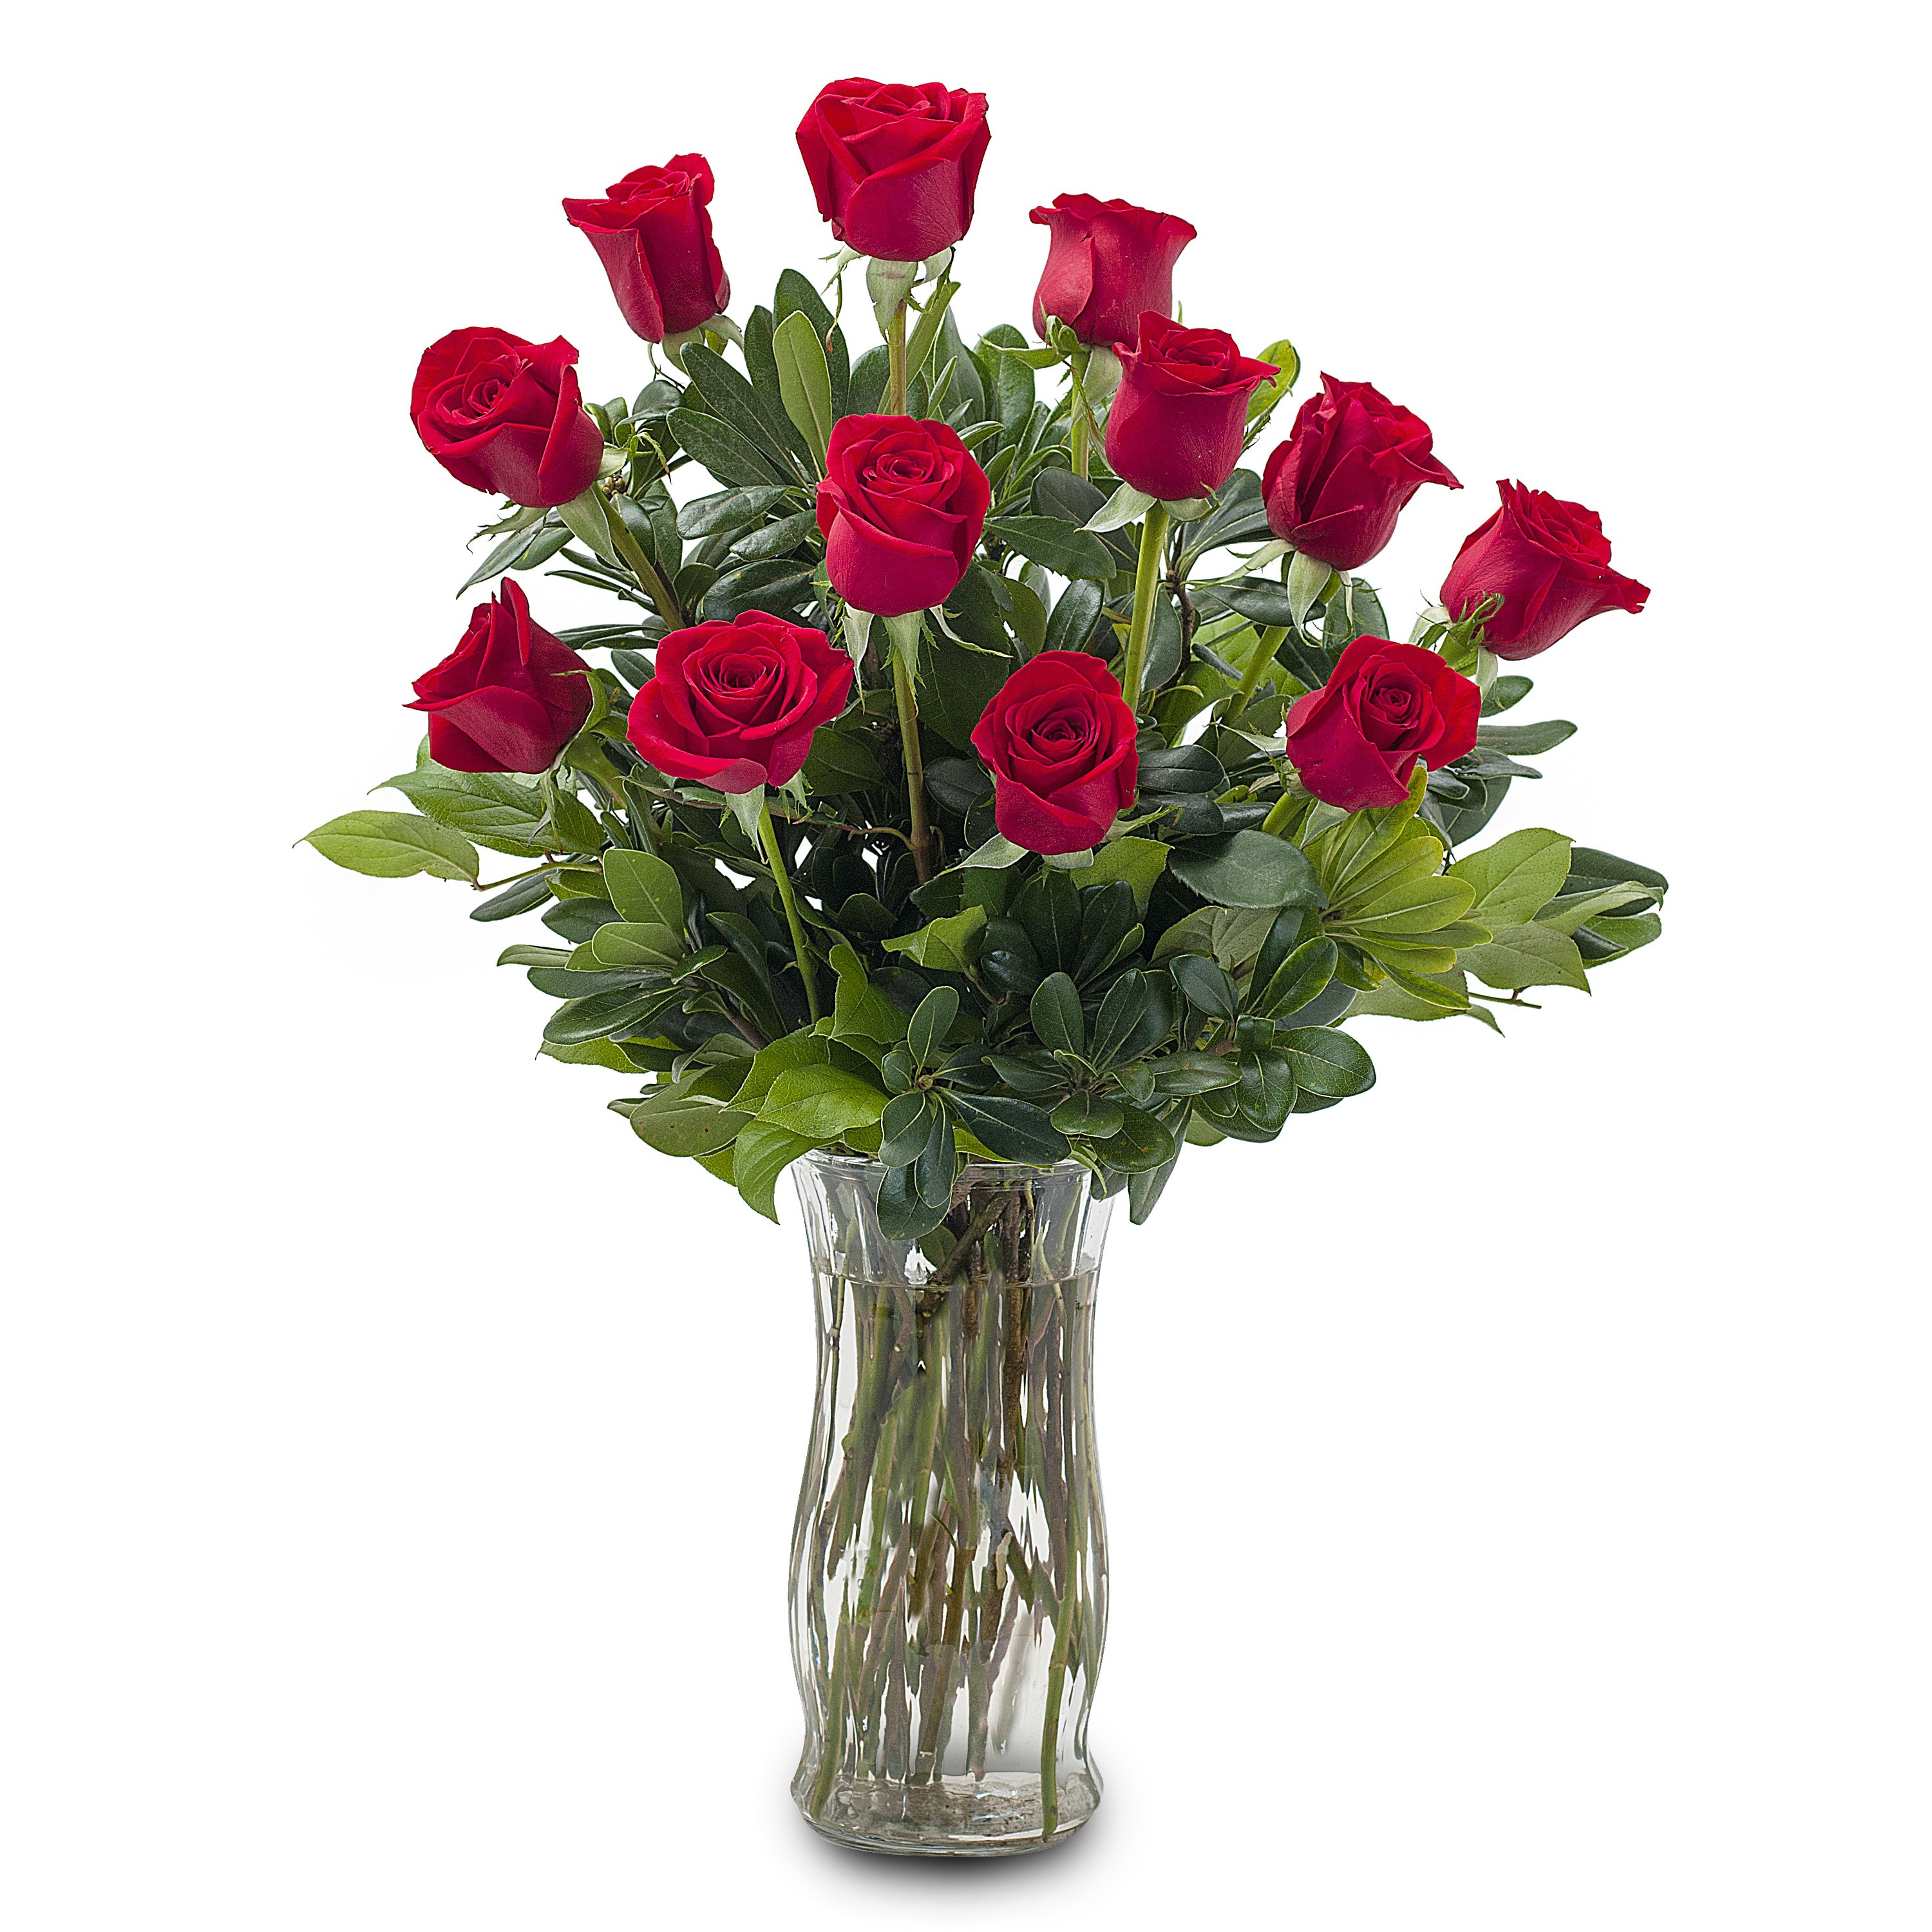 Classic Romance Beautiful Red Roses Lush Accents in a Vase 3 Sizes ...